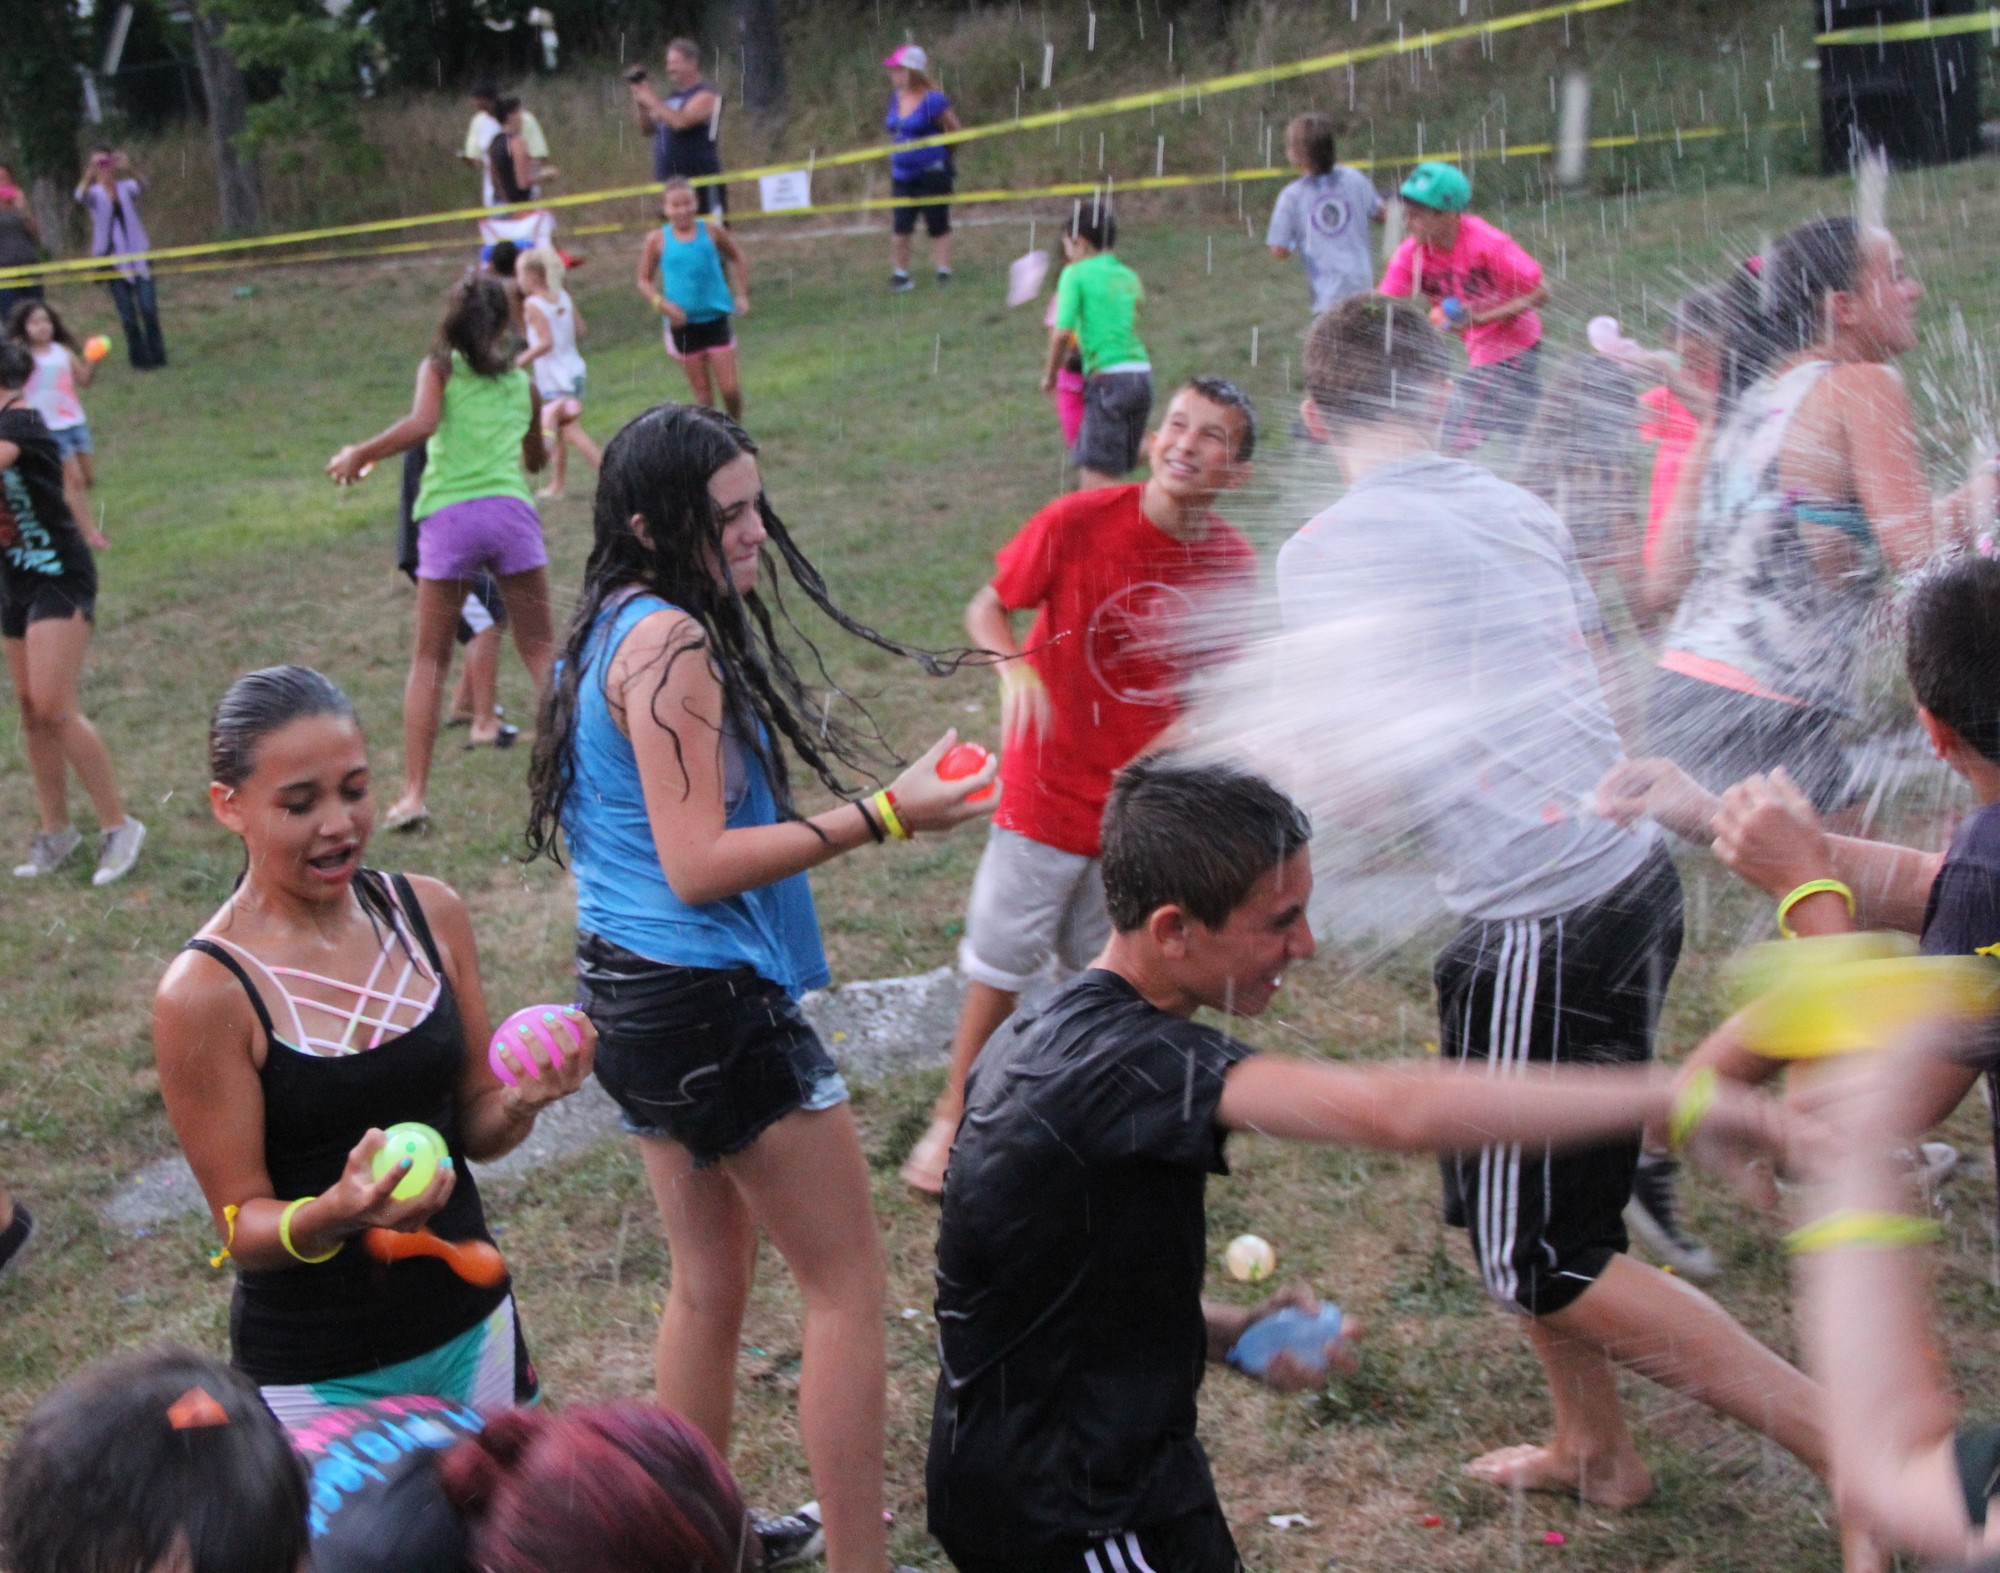 The water balloon fight in full swing on a hot summer day. (Jina Papadoniou/Herald)